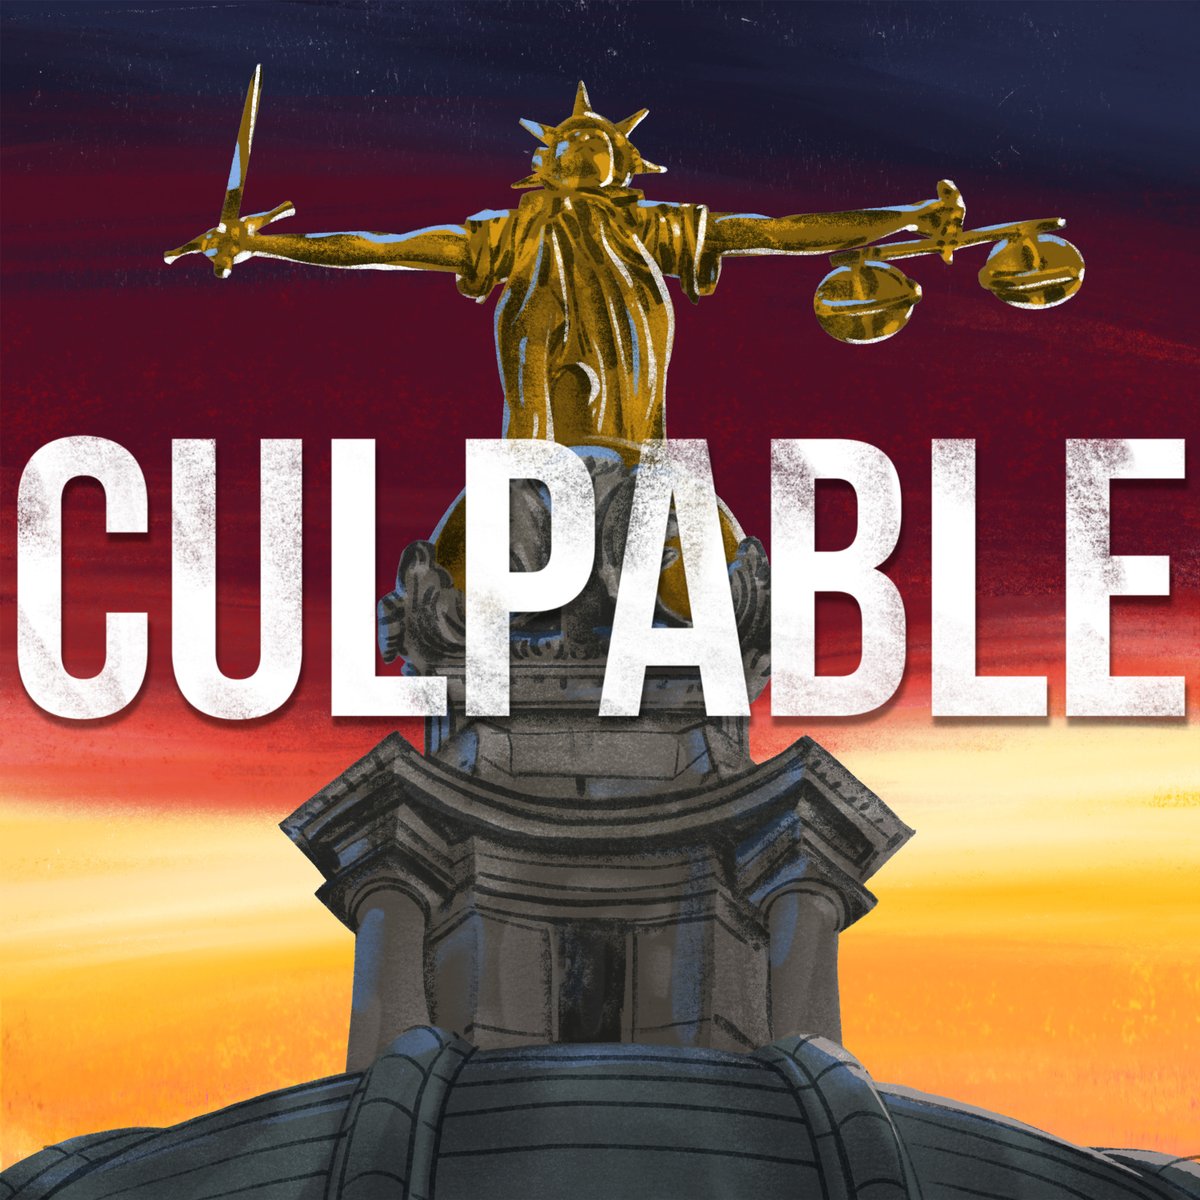 Sometimes the worst crimes happen when we least expect it. @culpablepodcast Case Review is back to explore new unsettling cases where culpability has yet to be established. Tune in to a brand new season on May 17th. #culpable #truecrime #podcast #tenderfoottv